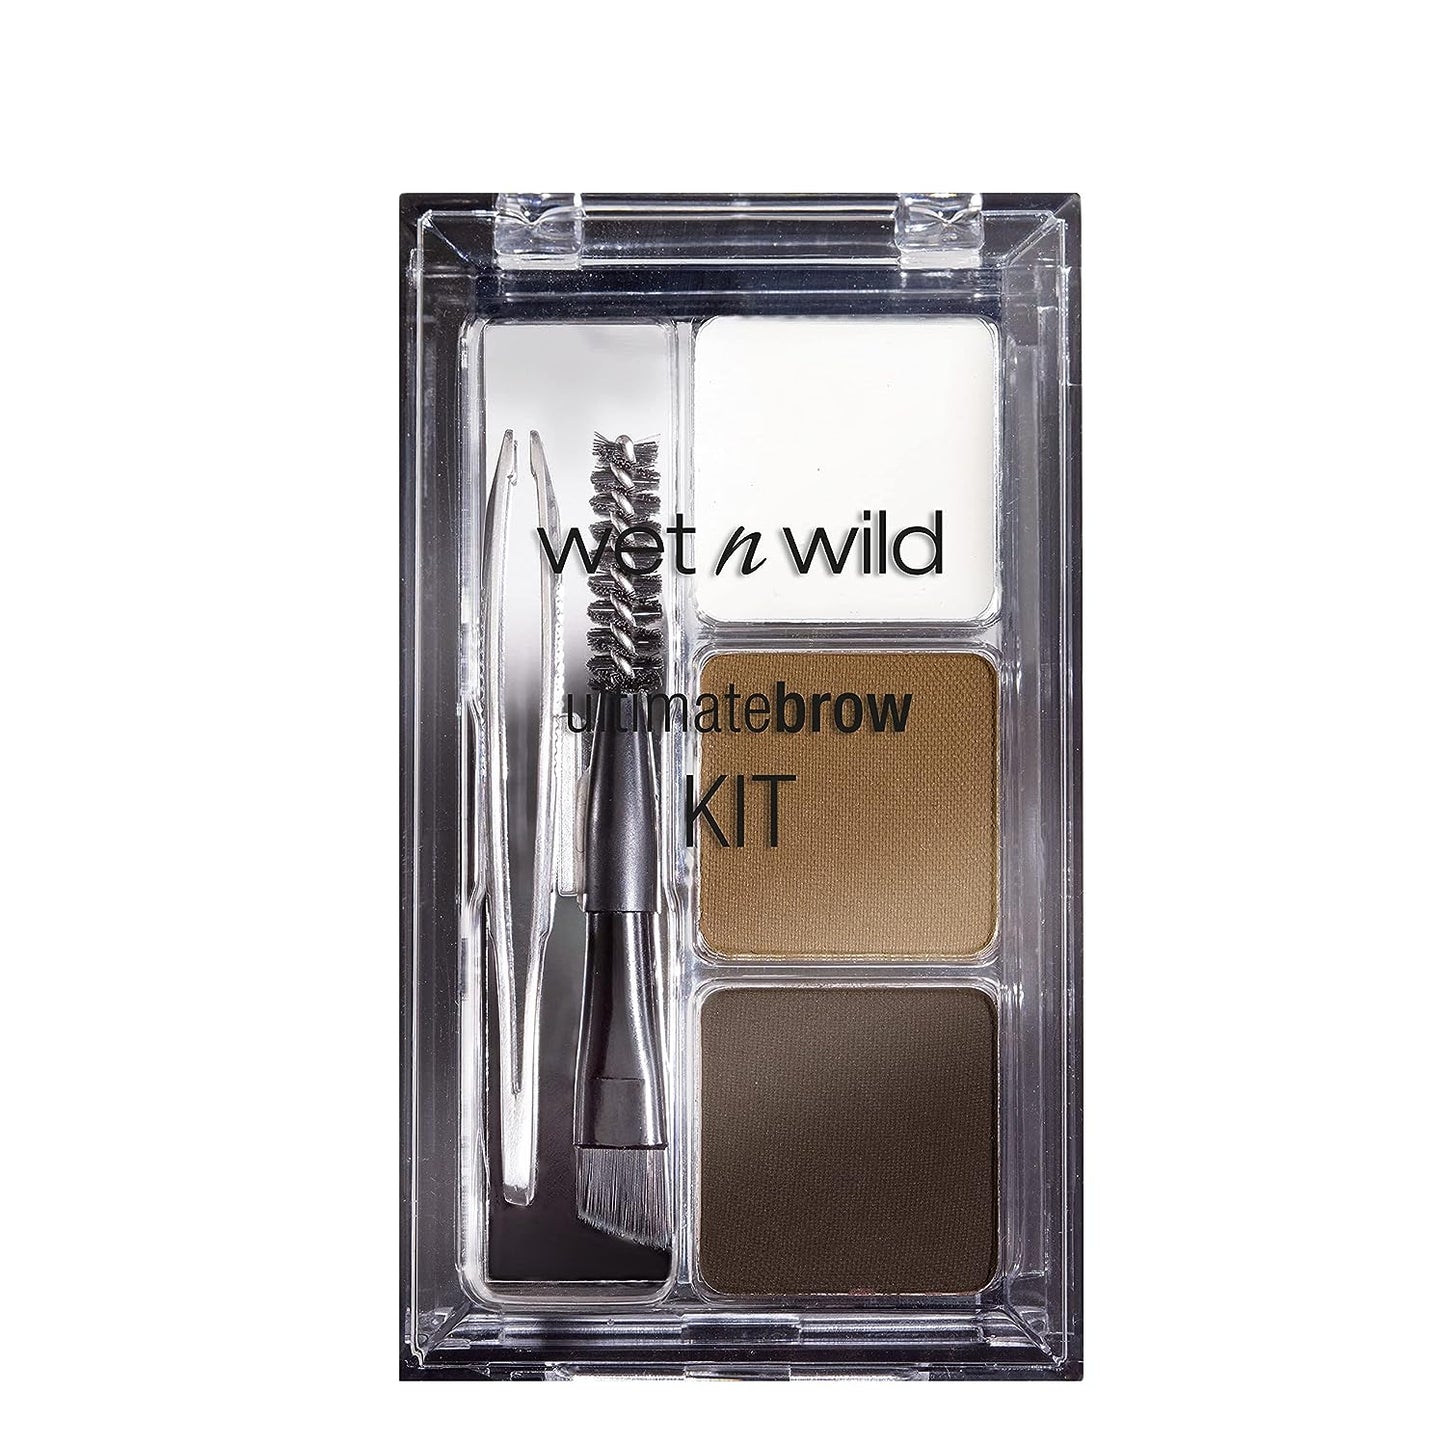 Wet n Wild Ultimate Brow Kit to Shape, Define and Fill the Eyebrows